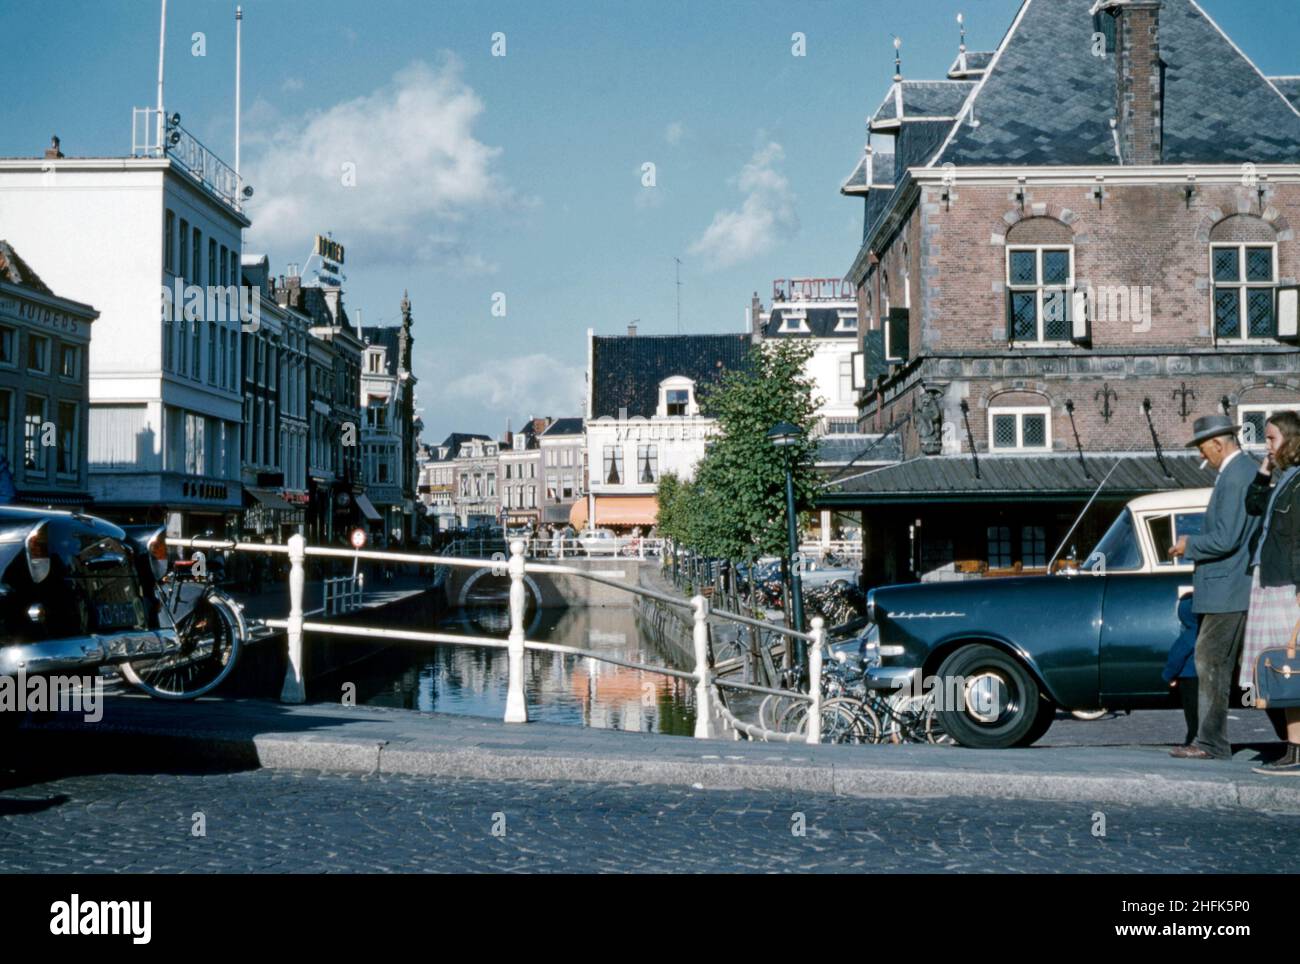 A view looking east from the canal bridge – the Waagplein crossing – in the centre of Leeuwarden, Friesland, the Netherlands in c.1960. The city is the provincial capital and seat of the Provincial Council of Friesland. It is the main economic hub of Friesland and is a former royal residence and has a city centre with many historic buildings – a vintage 1950s/1960s photograph. Stock Photo